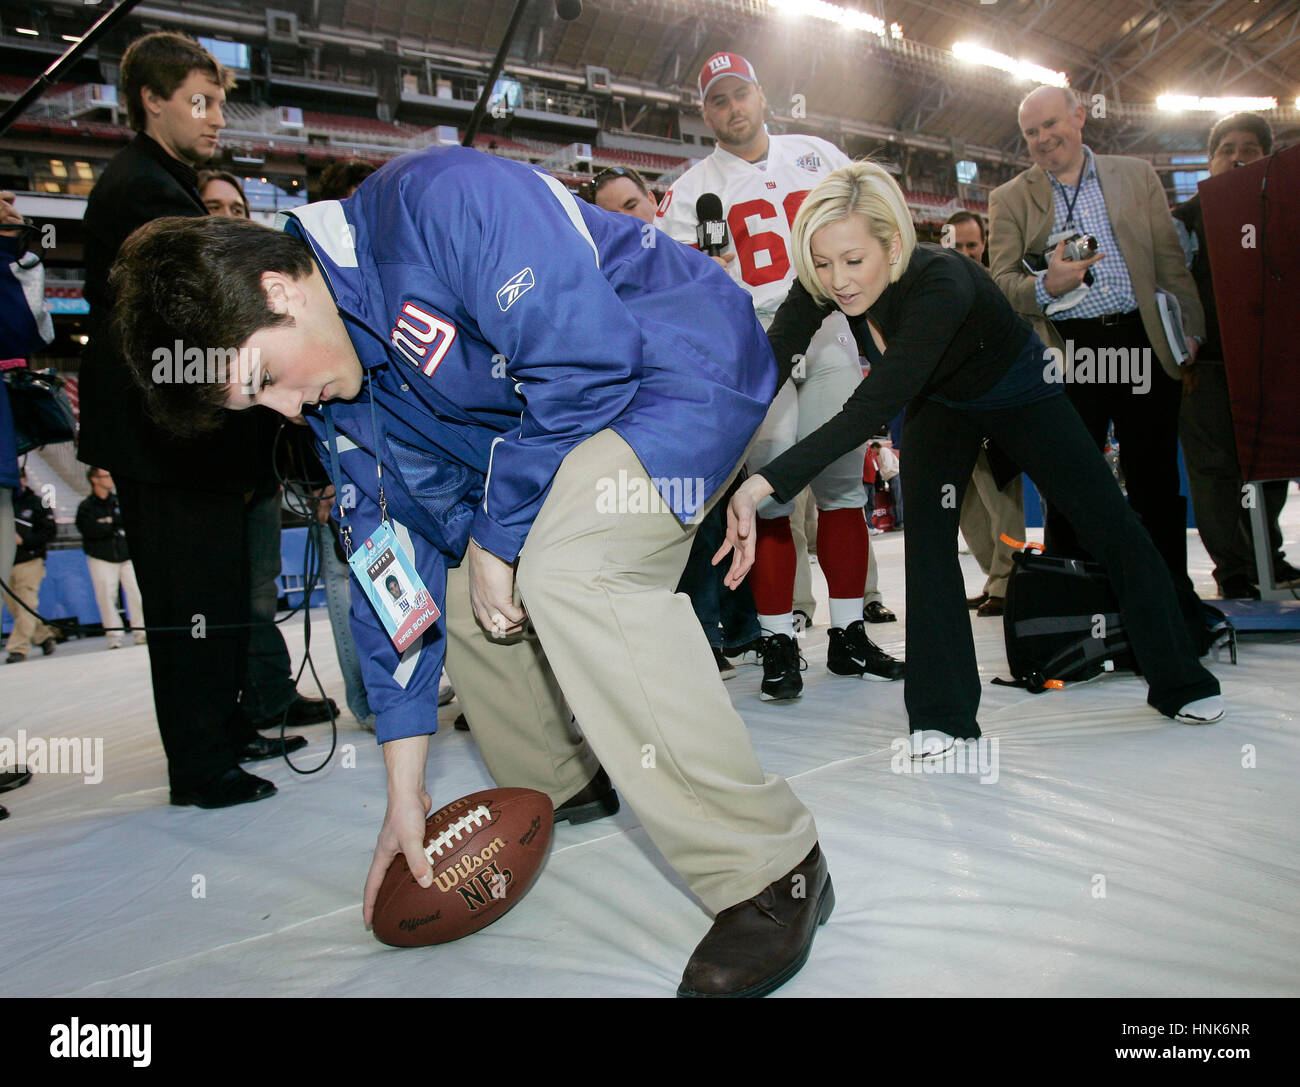 Giants center Shaun O'Hara (60) teaches former American Idol finalist Kellie Pickler how to receive a snap by Craig Falicon, left, during Media Day for Super Bowl XLII  at the University of Phoenix Stadium in Glendale, AZ, on Jan. 29, 2008.  Photo by Francis Specker Stock Photo